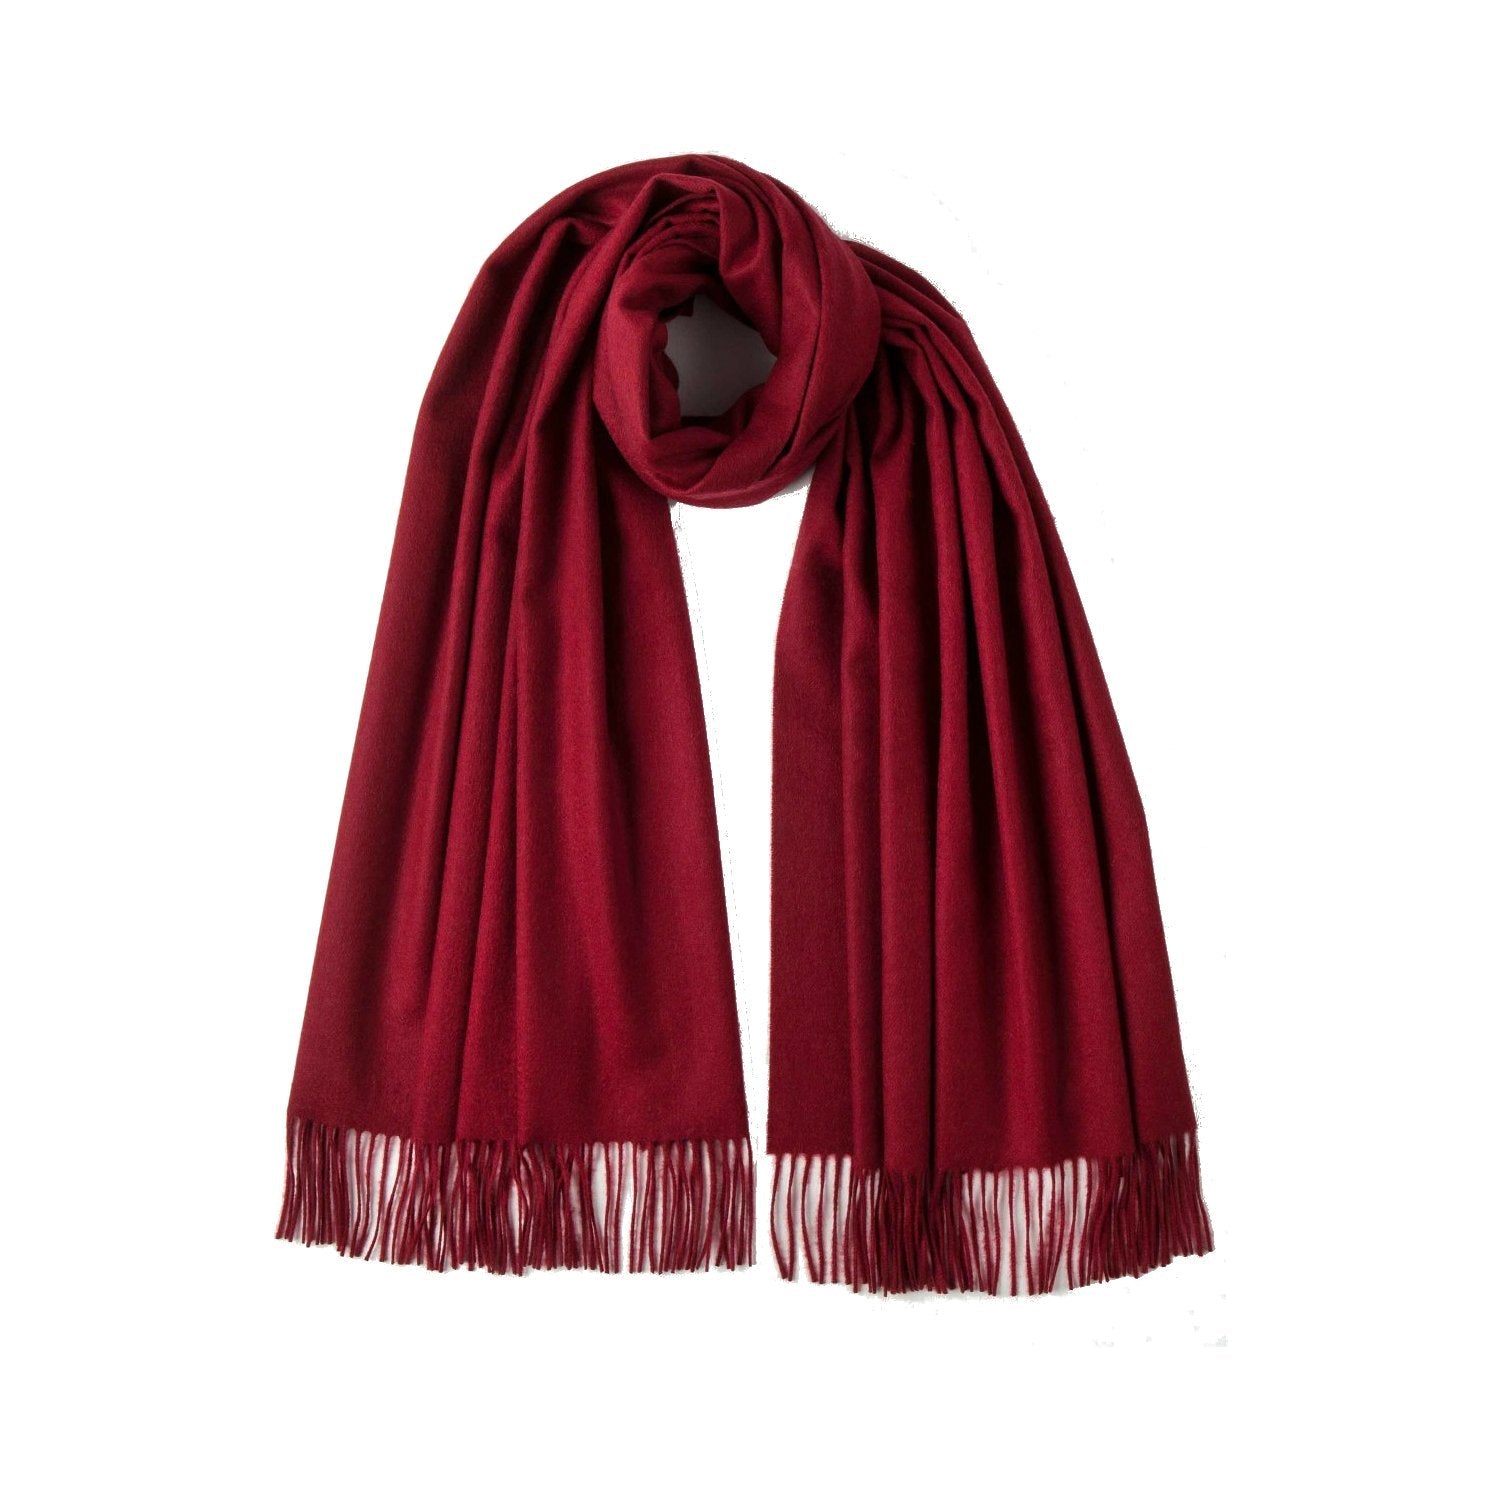 Johnsons of Elgin | Johnstons Cashmere | Merlot Wine Cashmere Stole | Large Scarf | buy at The Cashmere Choice | London